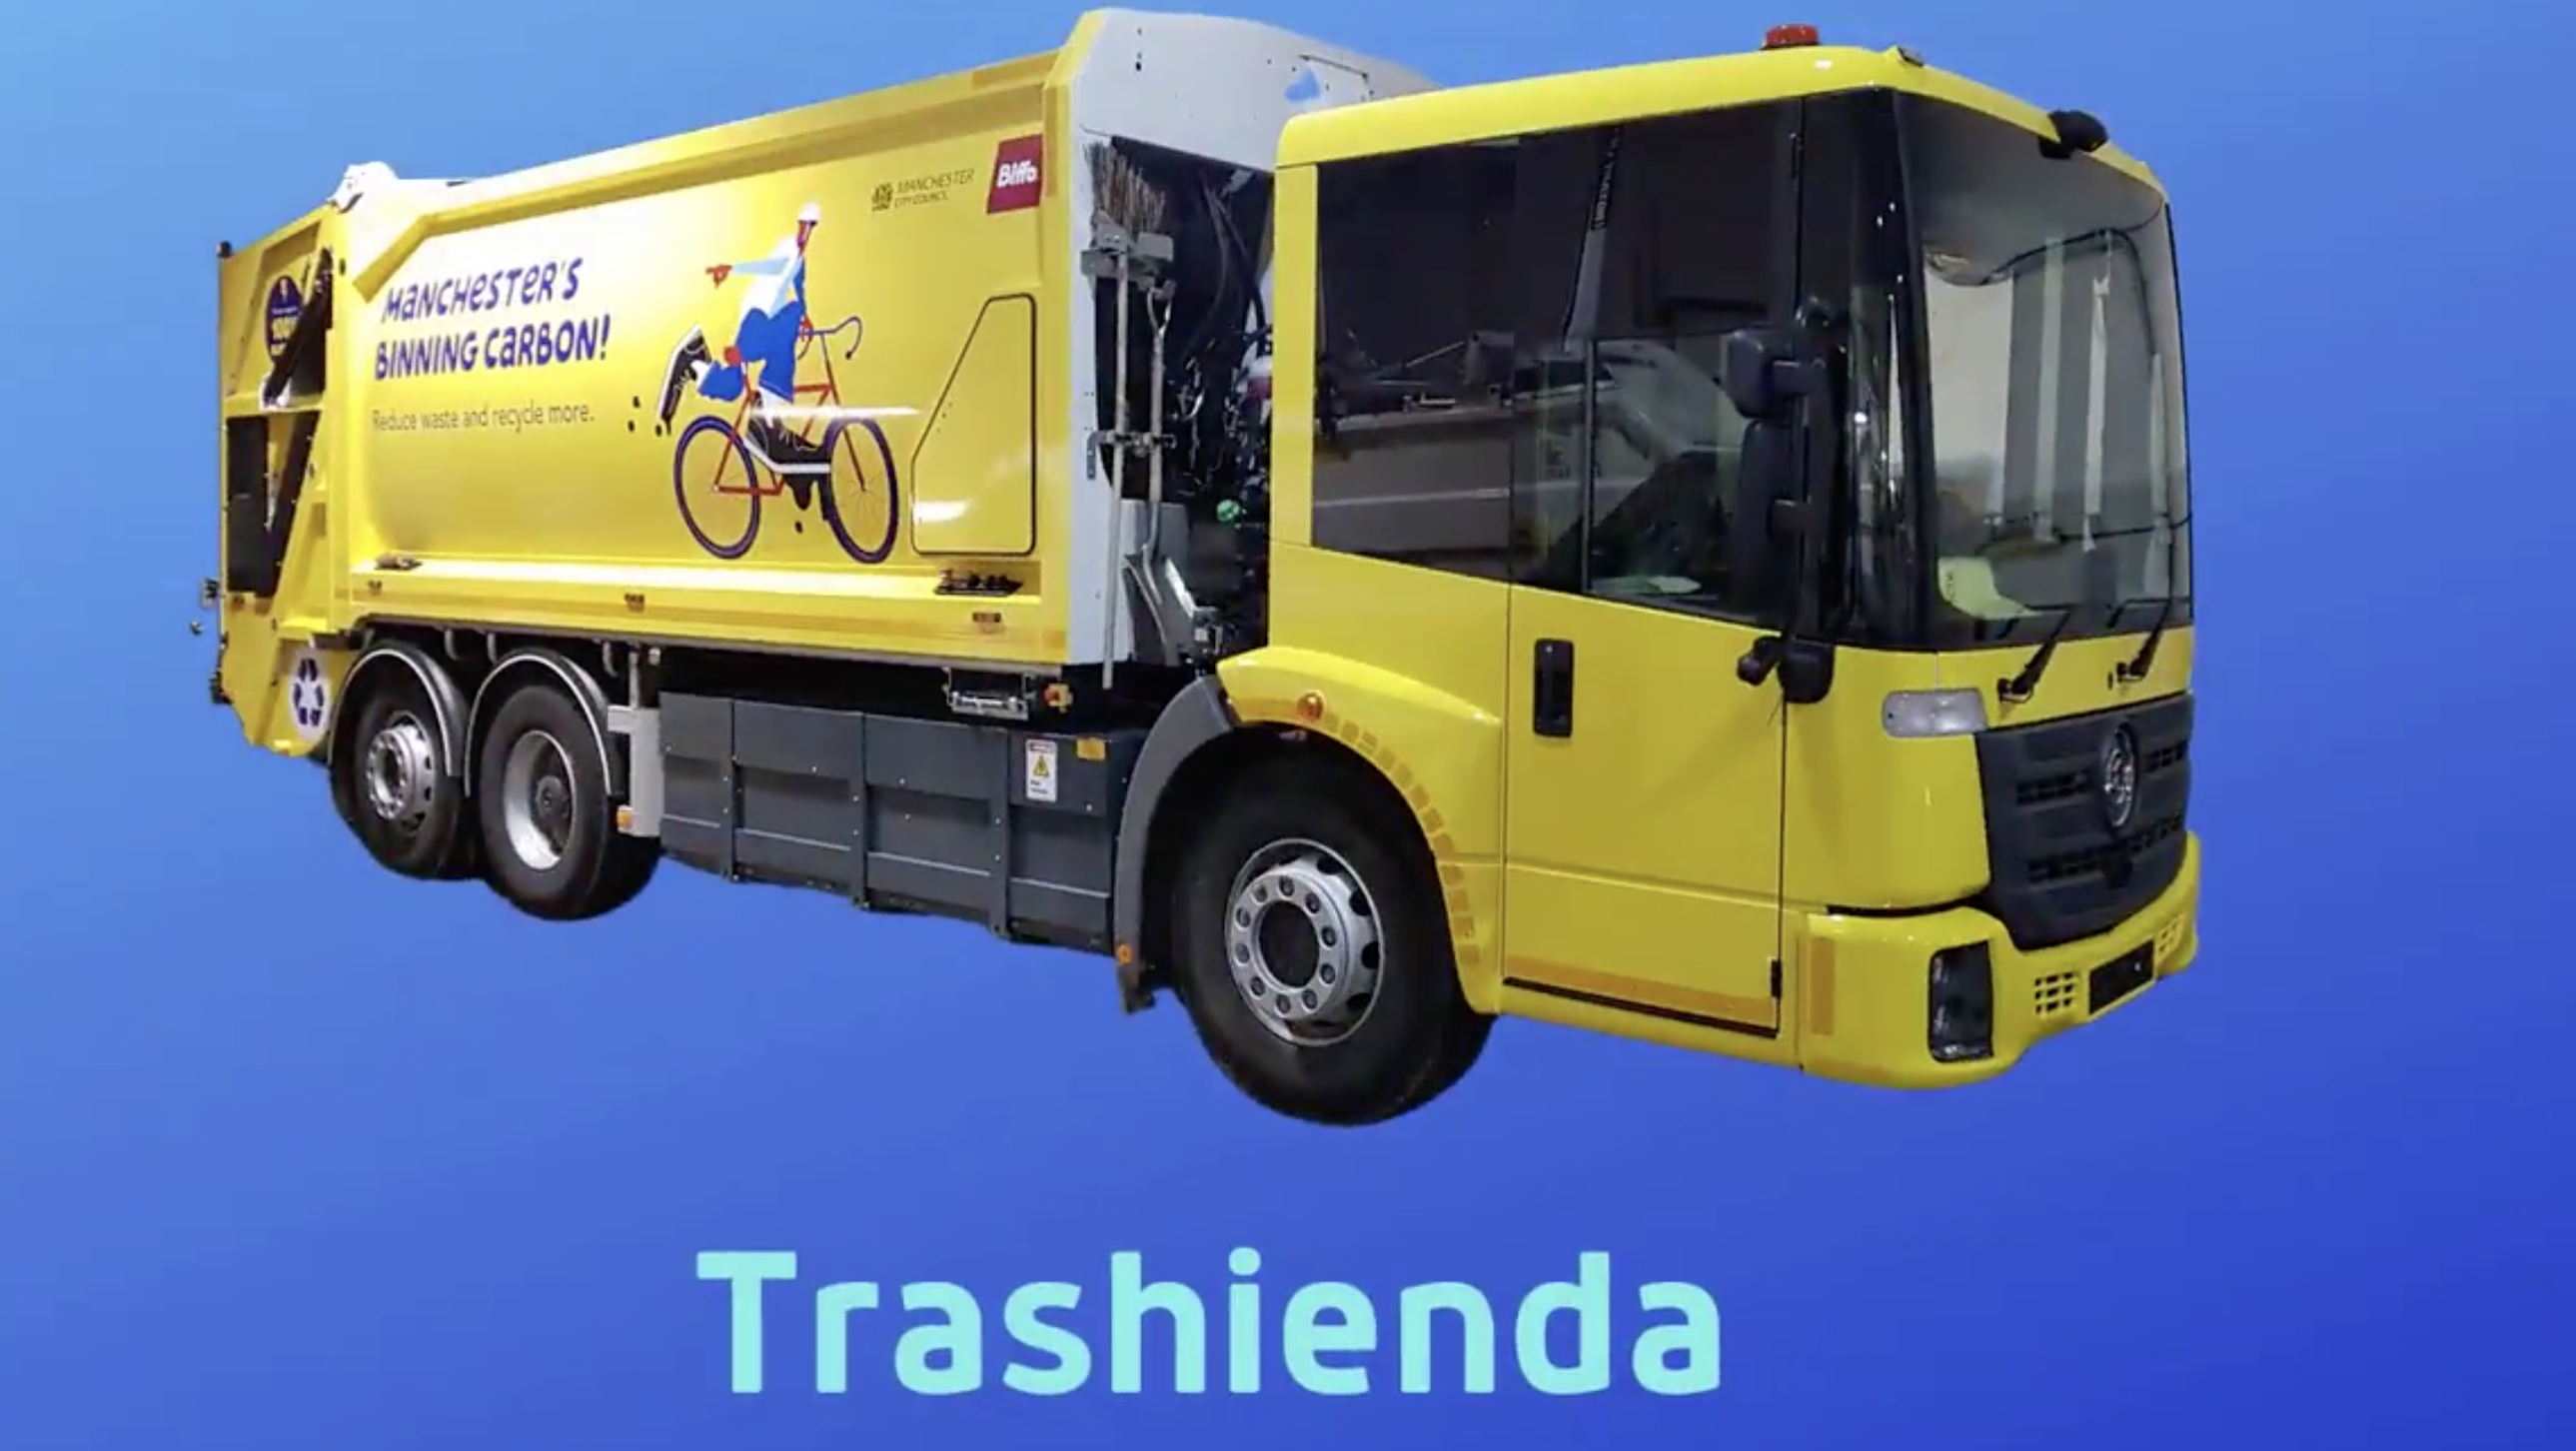 Manchester&#8217;s new electric bin lorries have been named by the public, The Manc